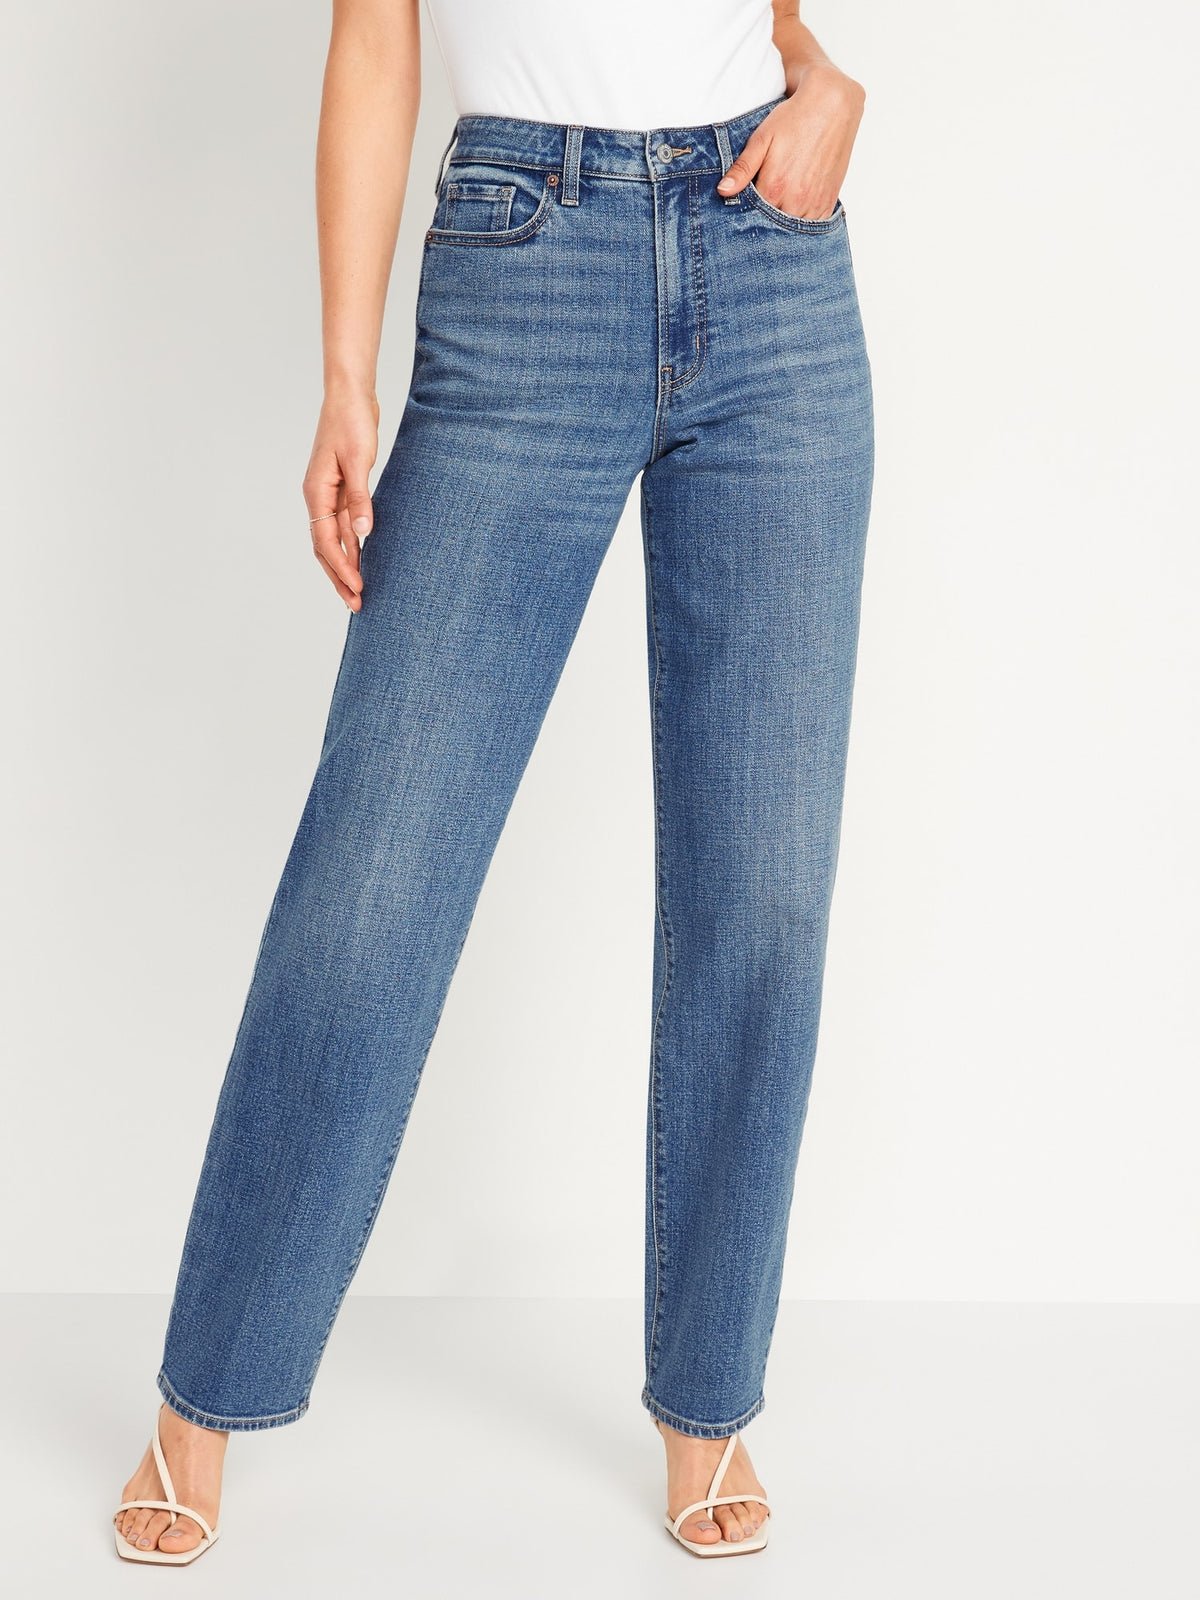 High-Waisted O.G Loose Jeans for Women_Courtney_3250.jpeg